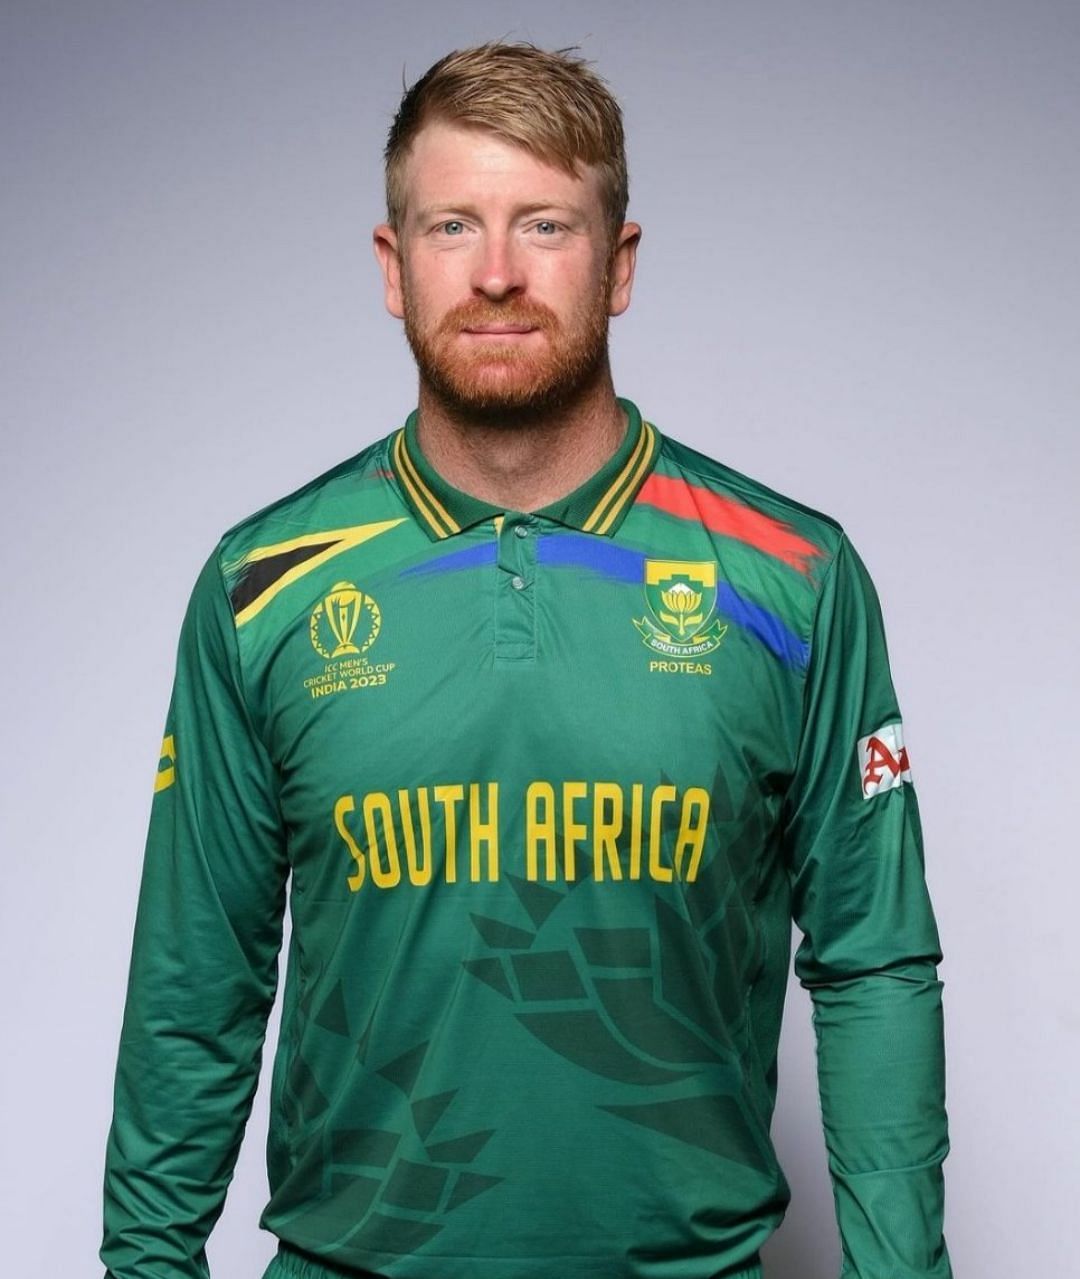 Heinrich Klaasen in his South Africa ODI World Cup Jersey [South Africa Cricket]